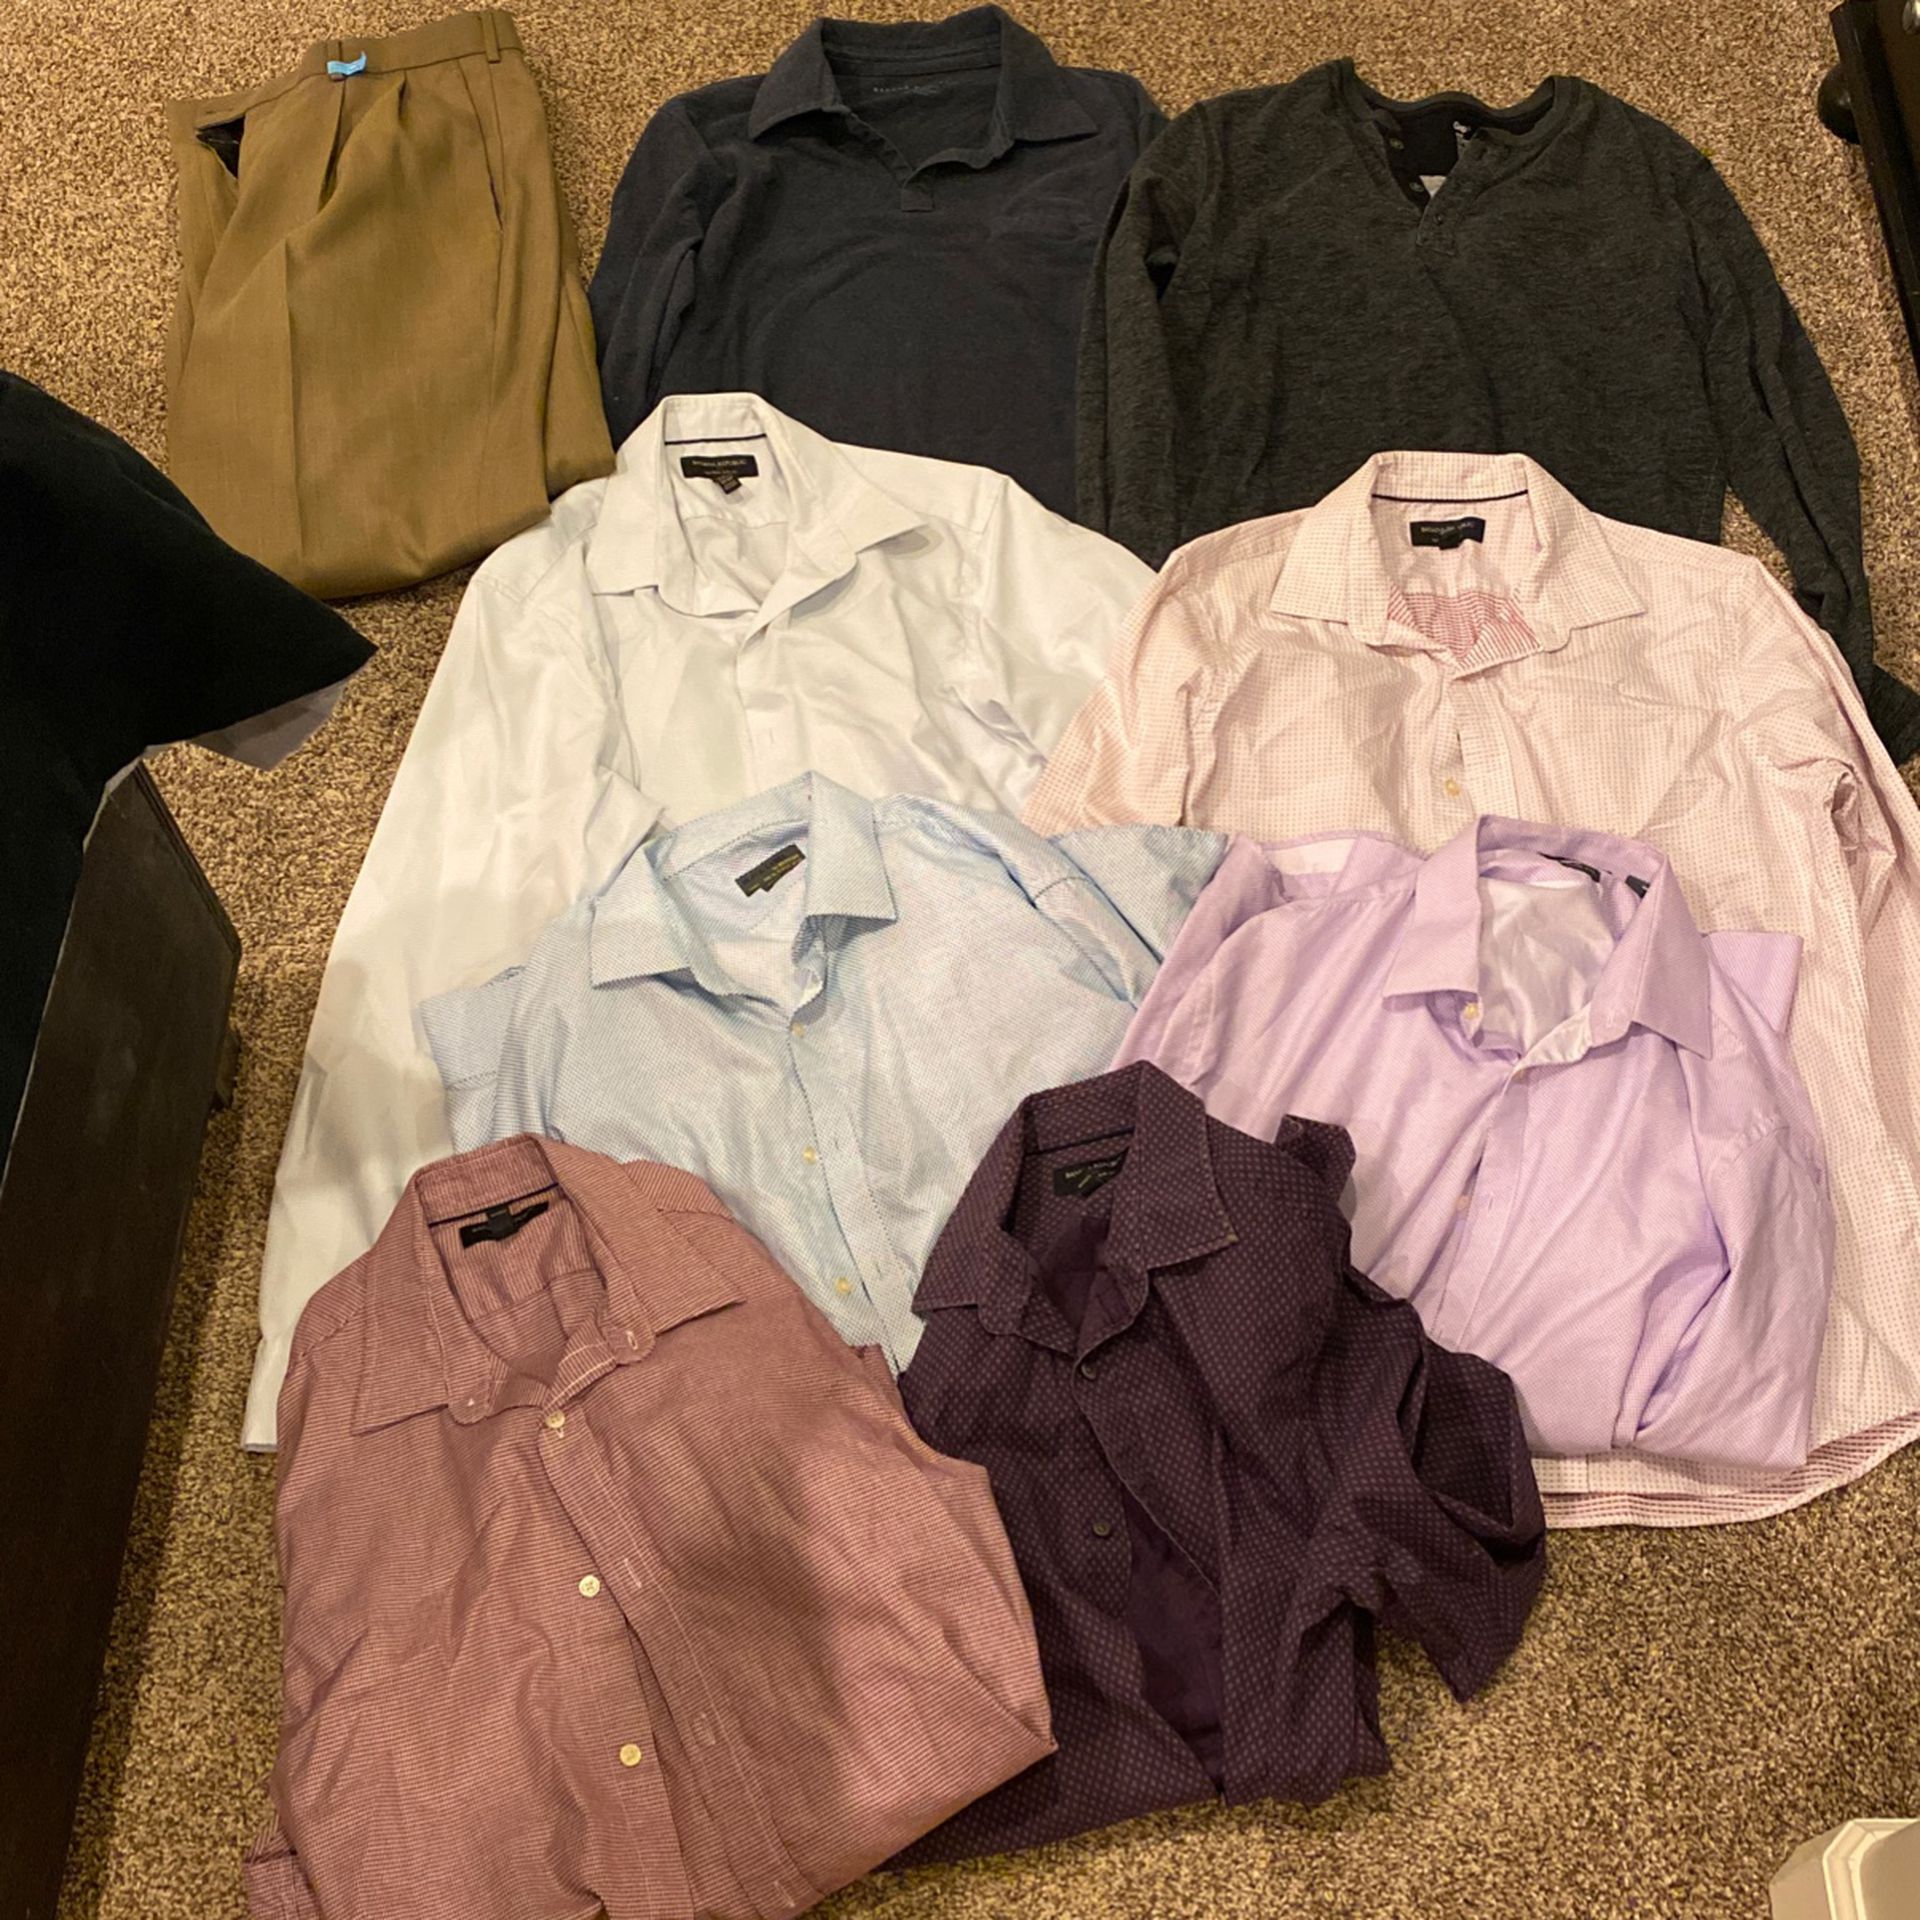 Free Clothes PENDING PICKUP